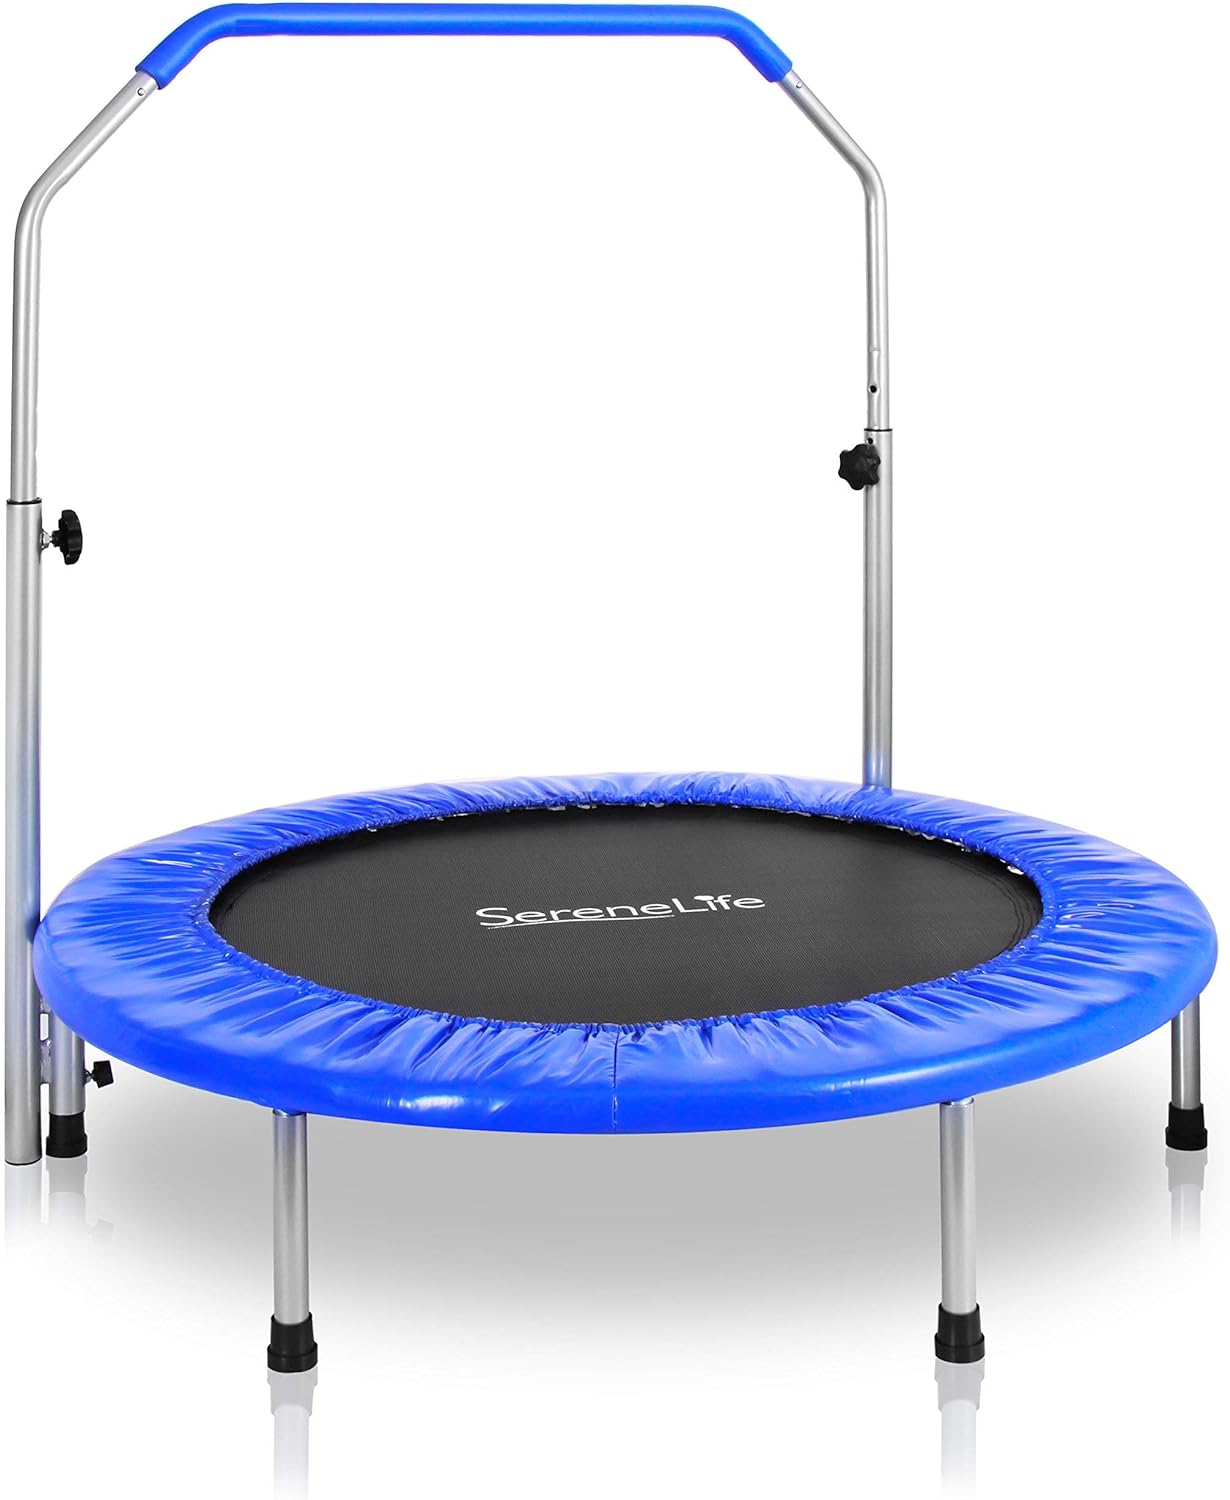 SereneLife Portable  Foldable Trampoline - 40 in-Home Mini Rebounder with Adjustable Handrail, Fitness Body Exercise - SLSPT409, Blue